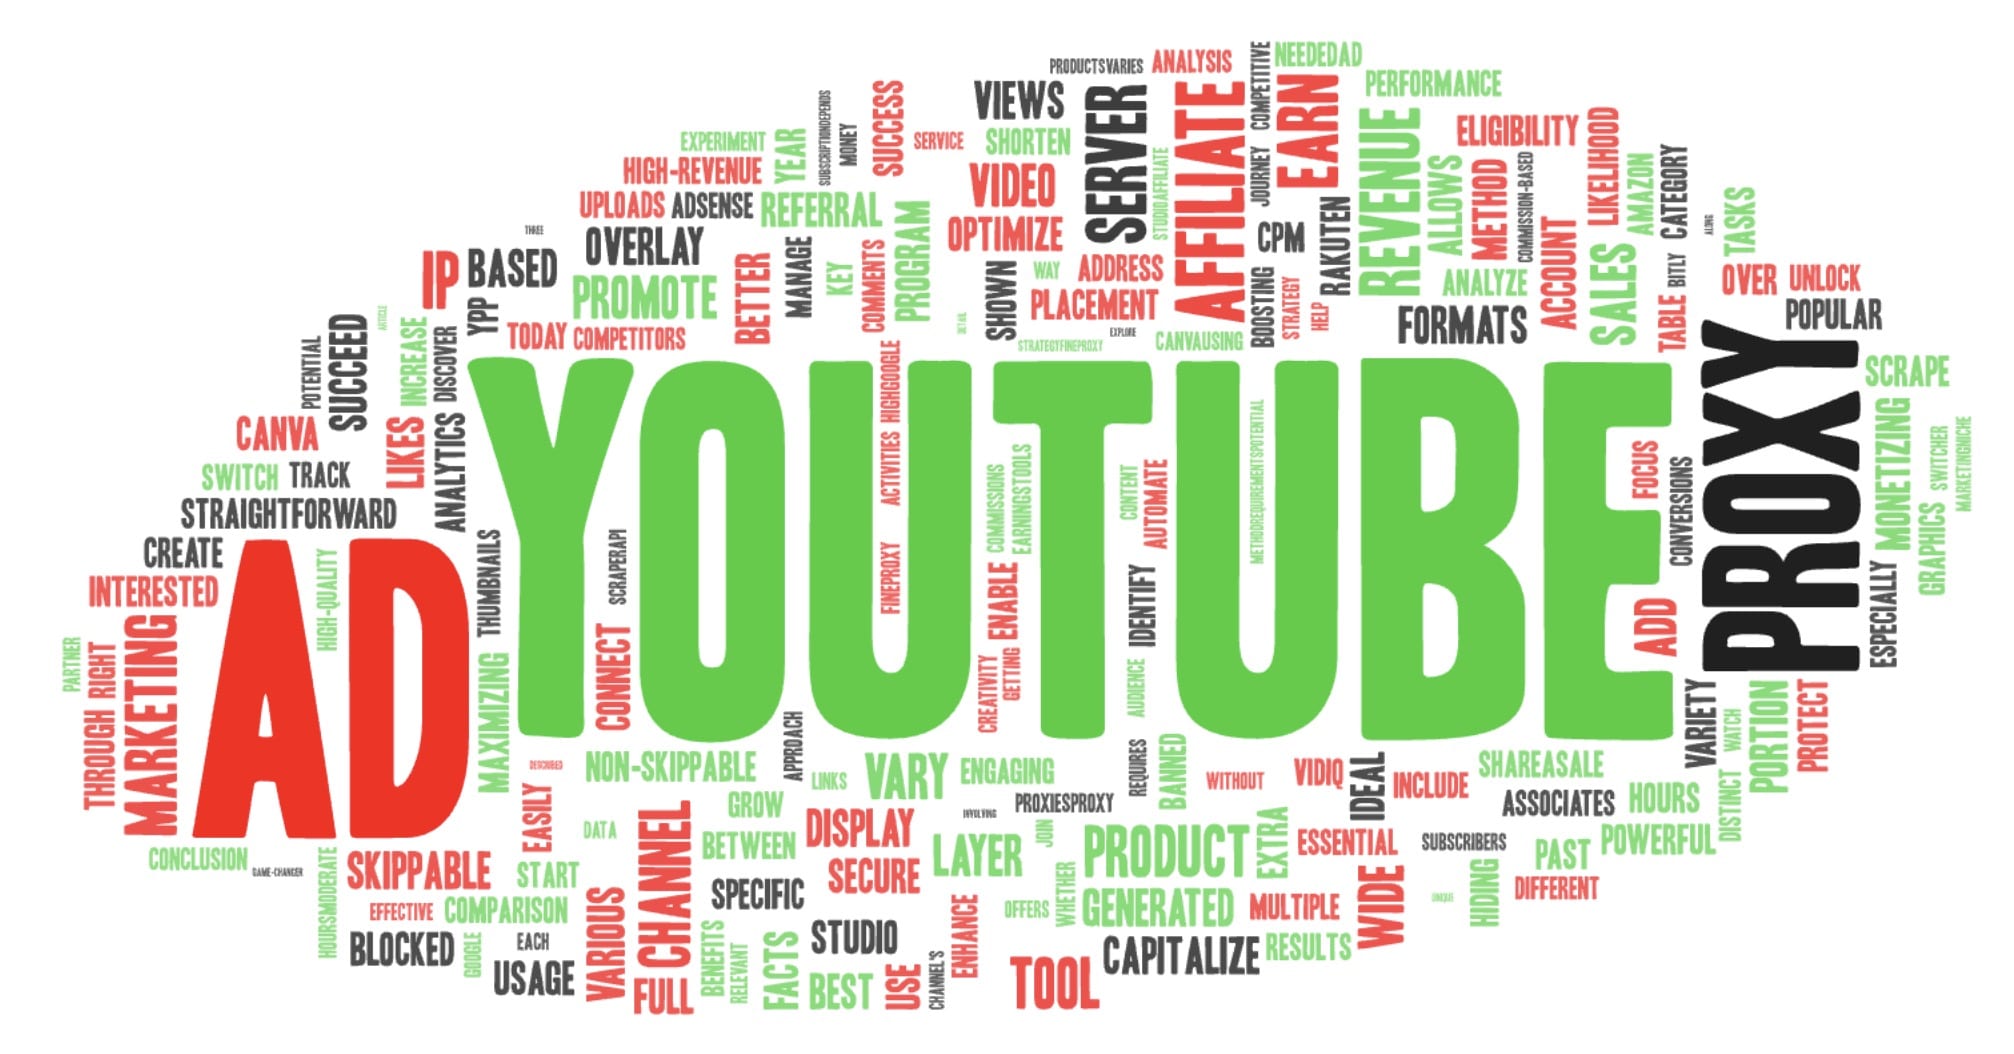 How to Make Money on YouTube? Learn 3 Proven Methods!